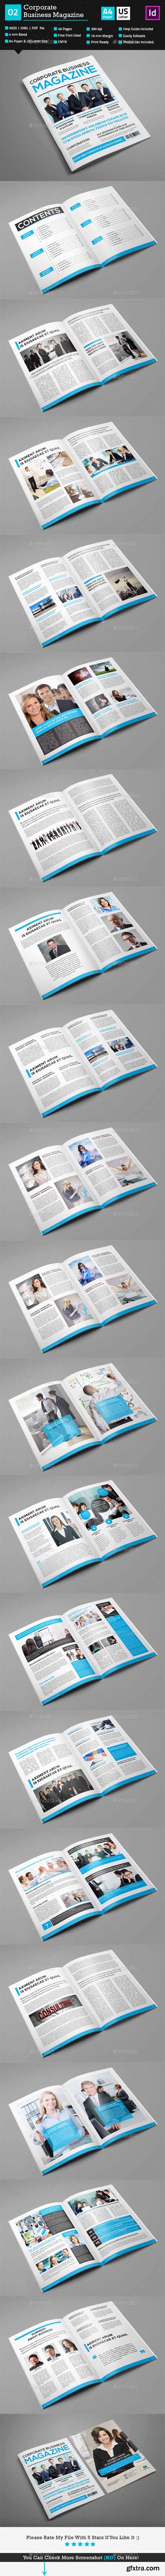 GR - Corporate Business Magazine_Indesign 40 Pages_V2 9789663